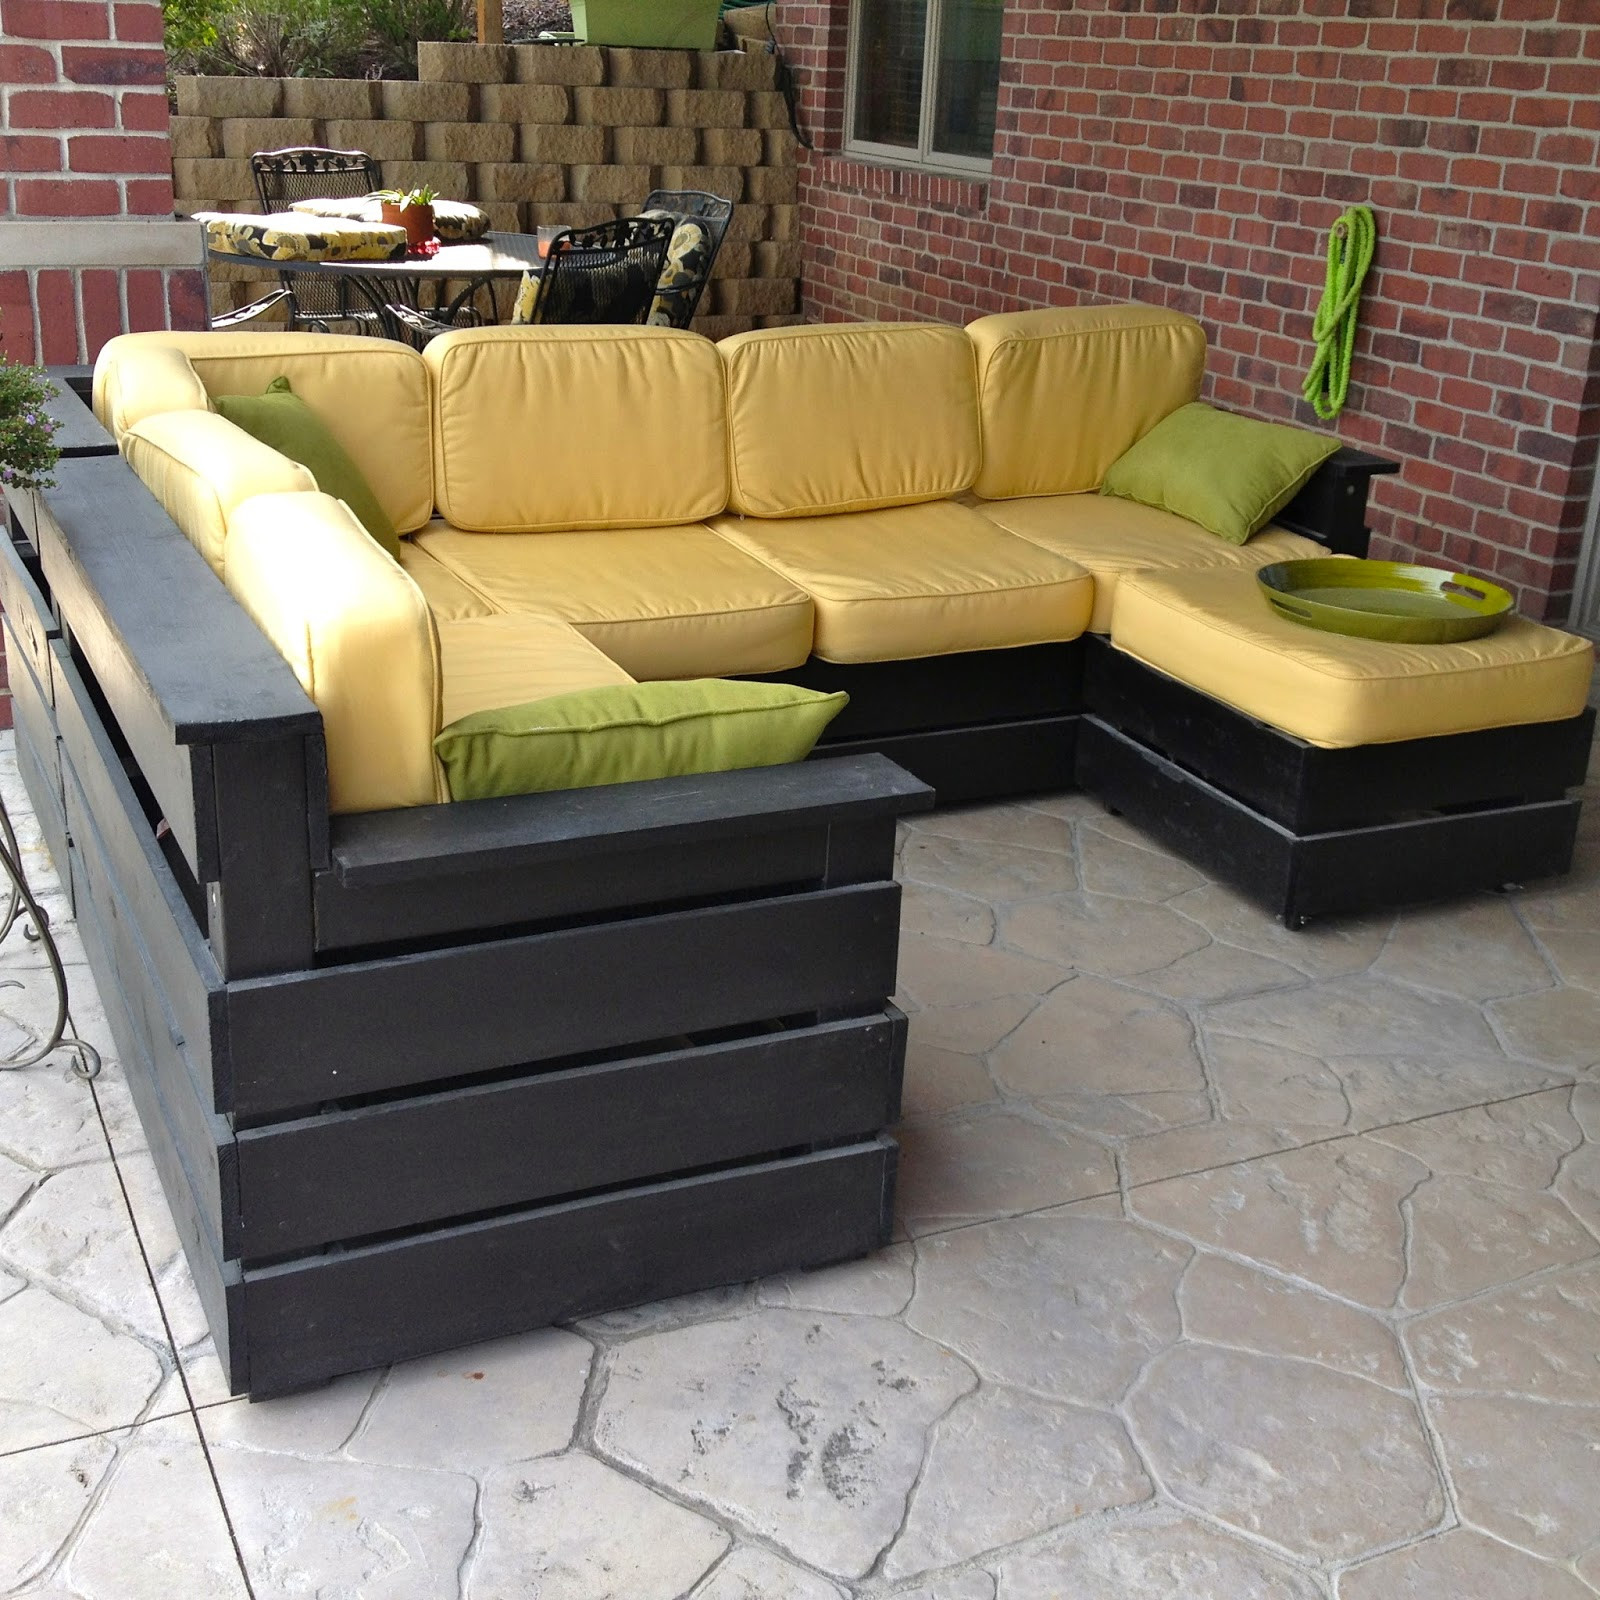 Outdoor Sectional DIY
 DIY Why Spend More DIY Outdoor Sectional